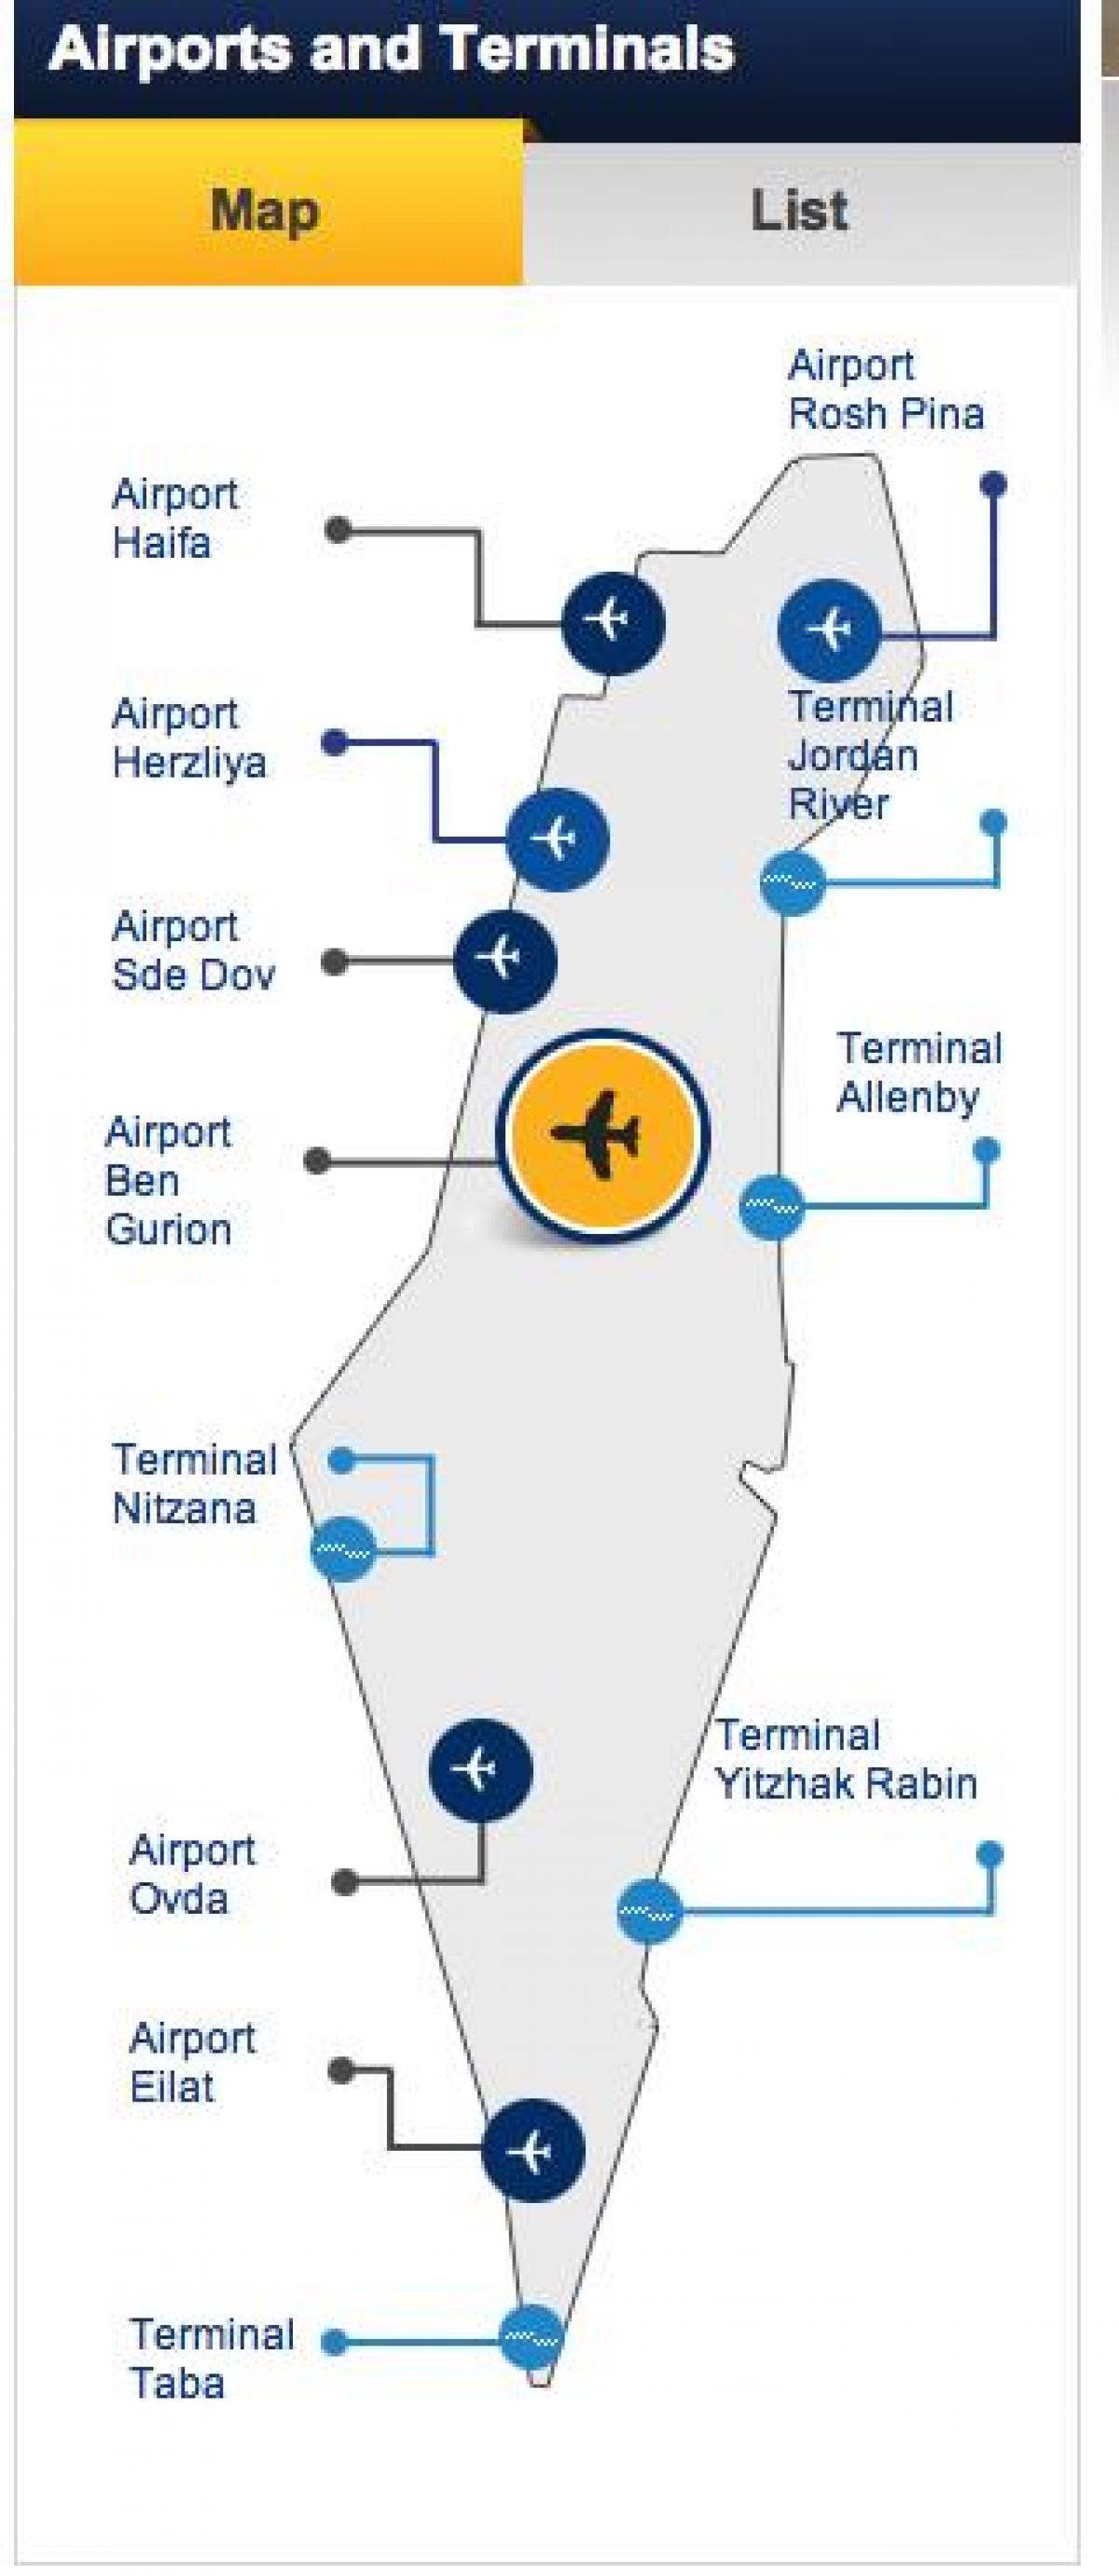 Map of Israel airports